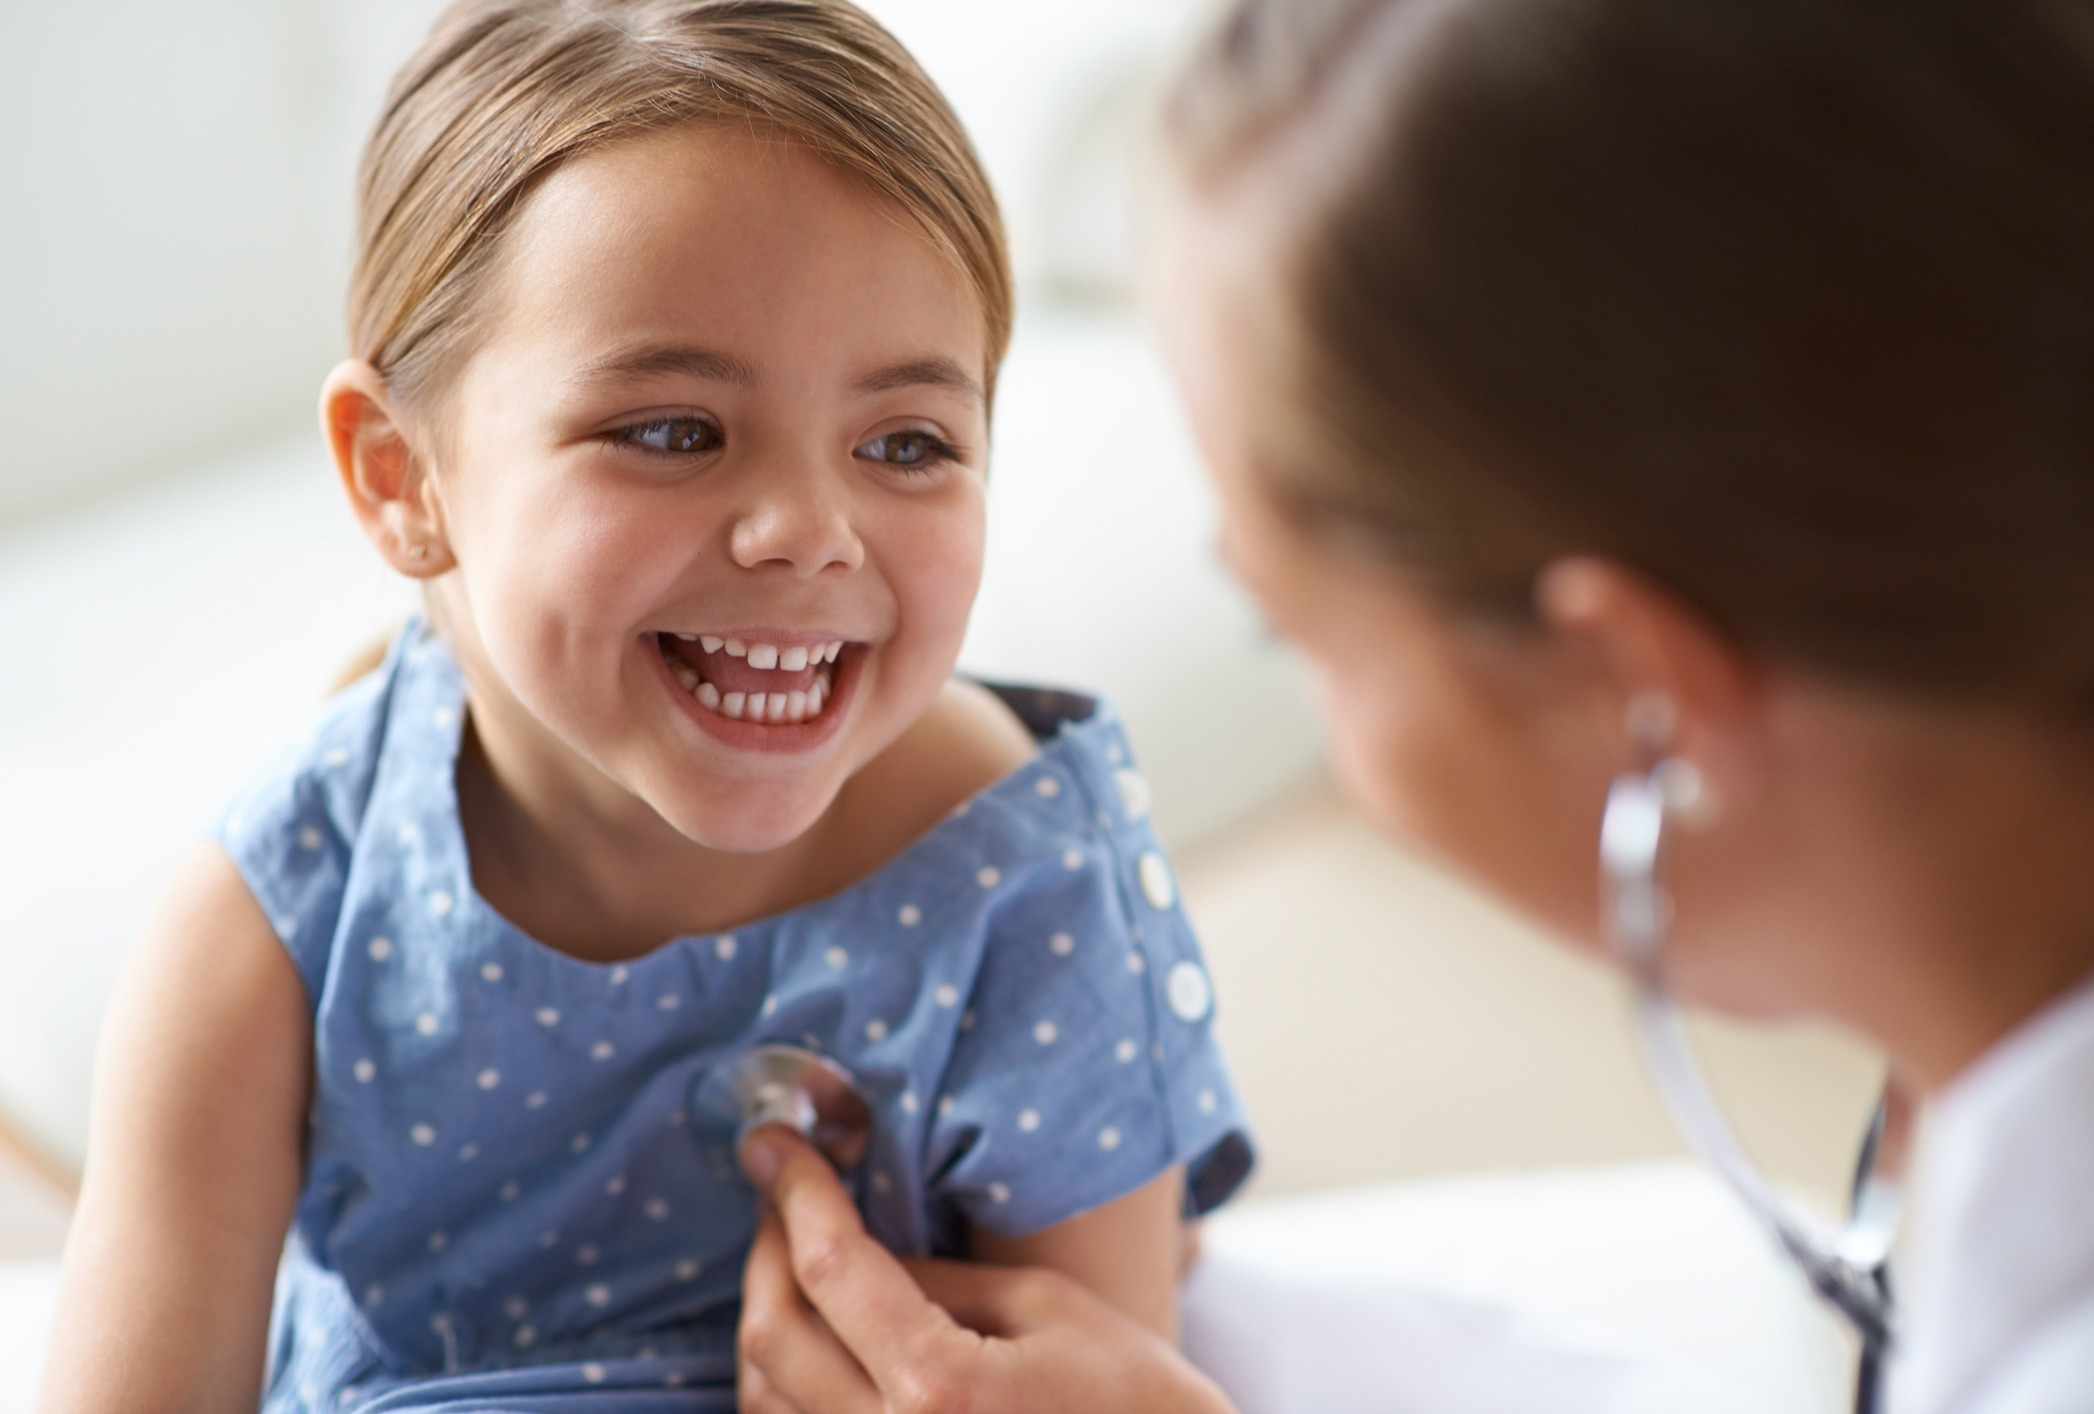 Tips for a smooth visit to the pediatrician